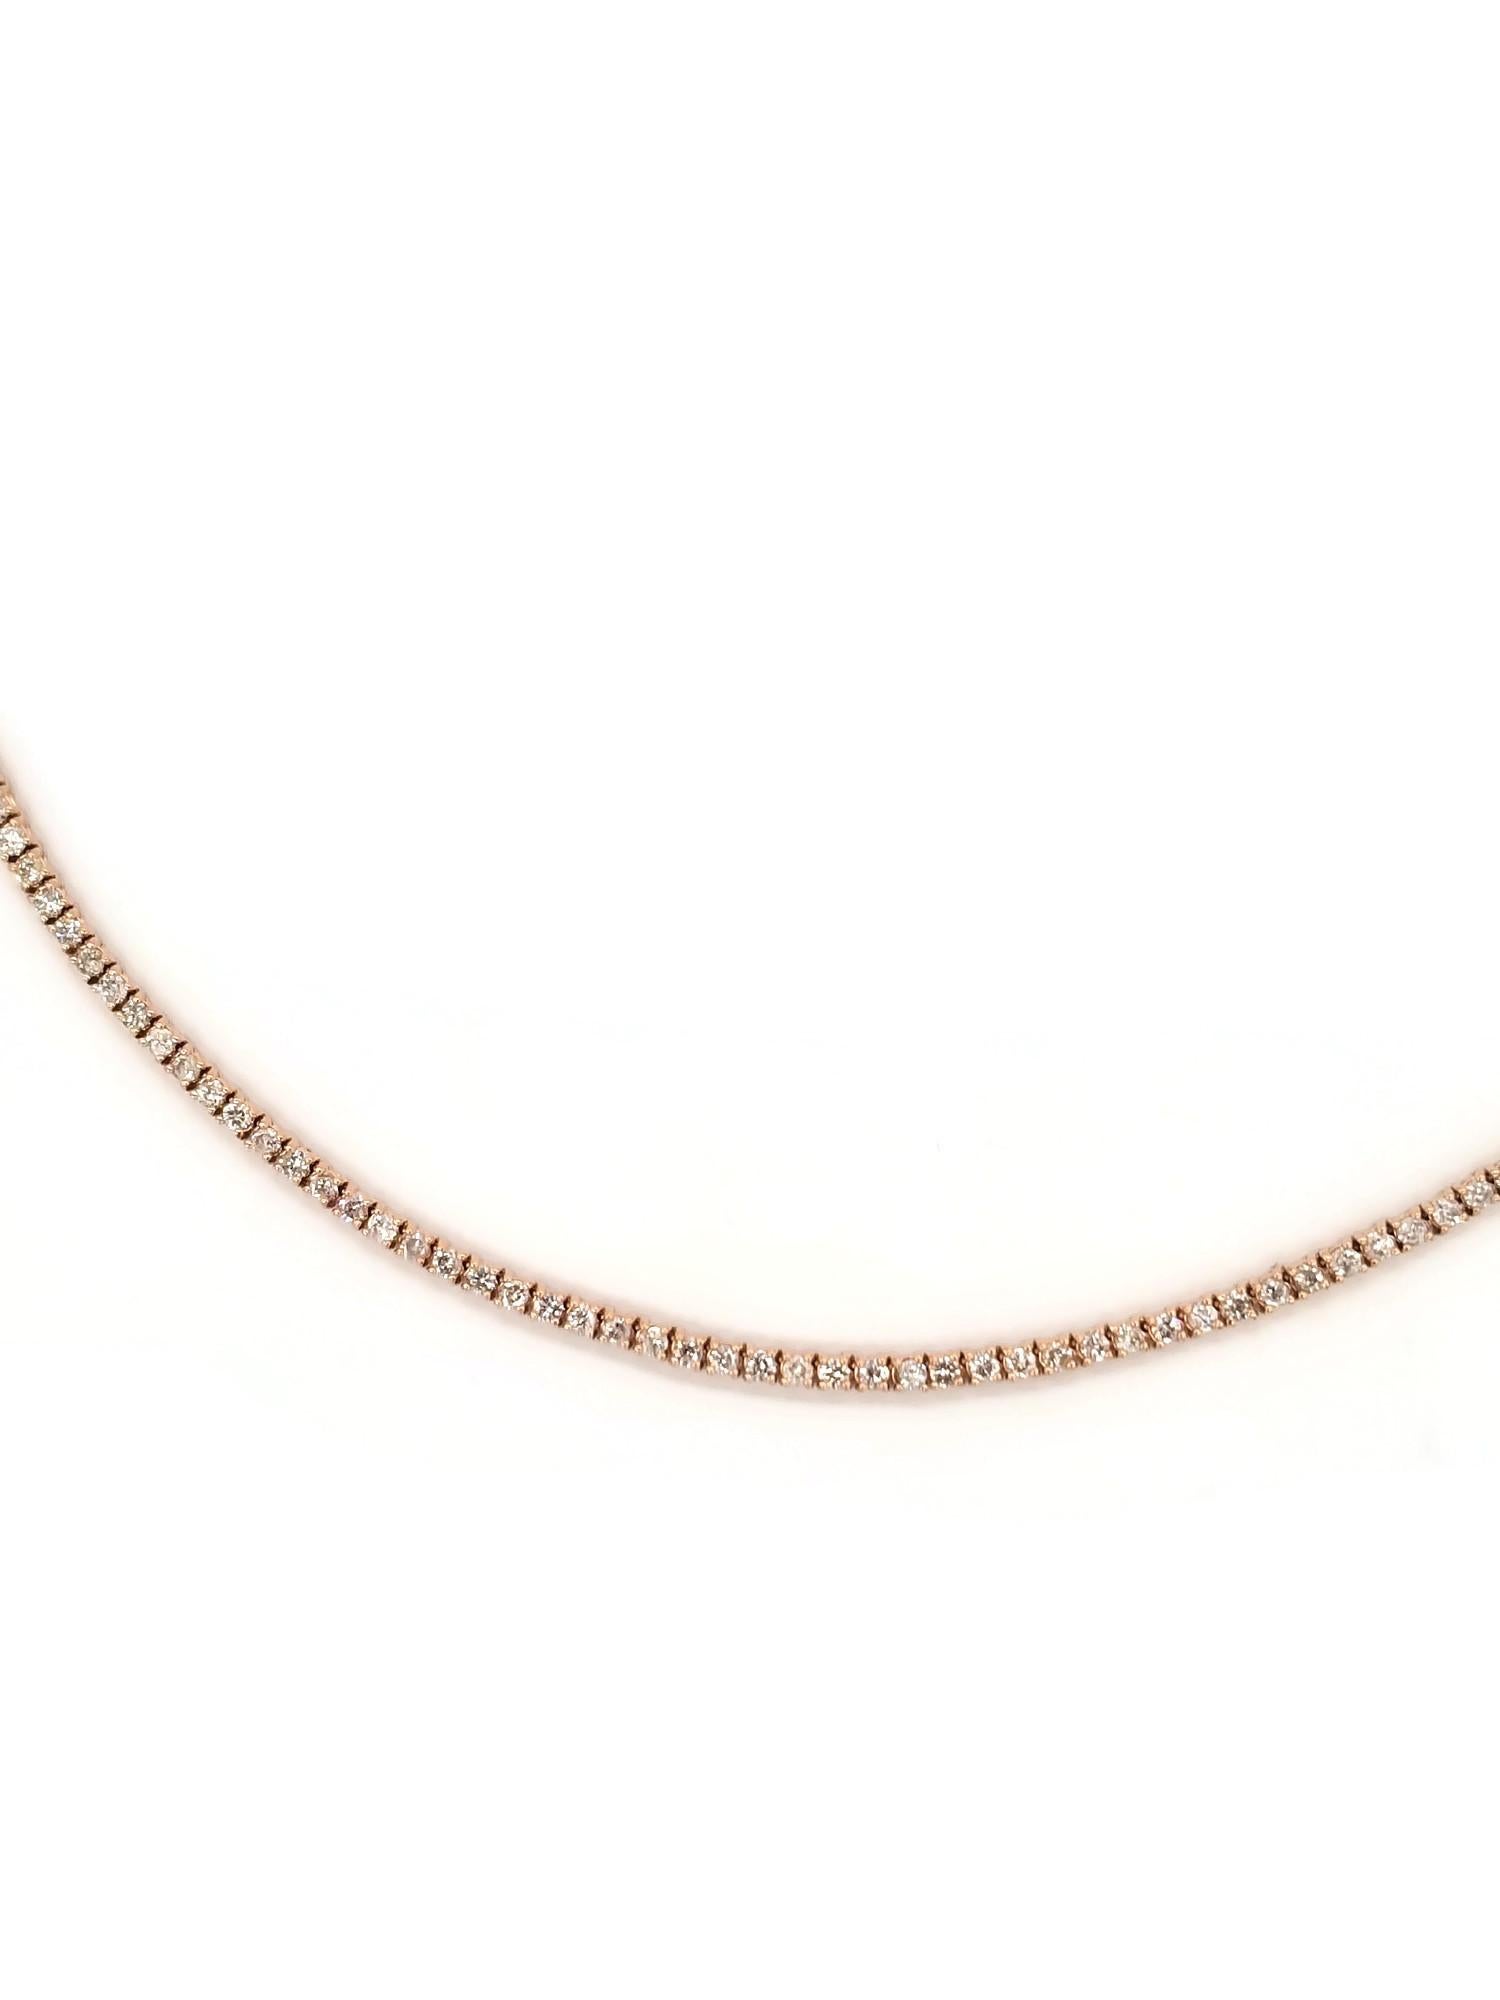 Brilliant and beautiful tennis necklace, natural round-brilliant cut white diamonds clean and Excellent shine. 14k rose gold classic four-prong style for maximum light brilliance. 15 inch length. average I Color, SI Clarity. Elegance for every